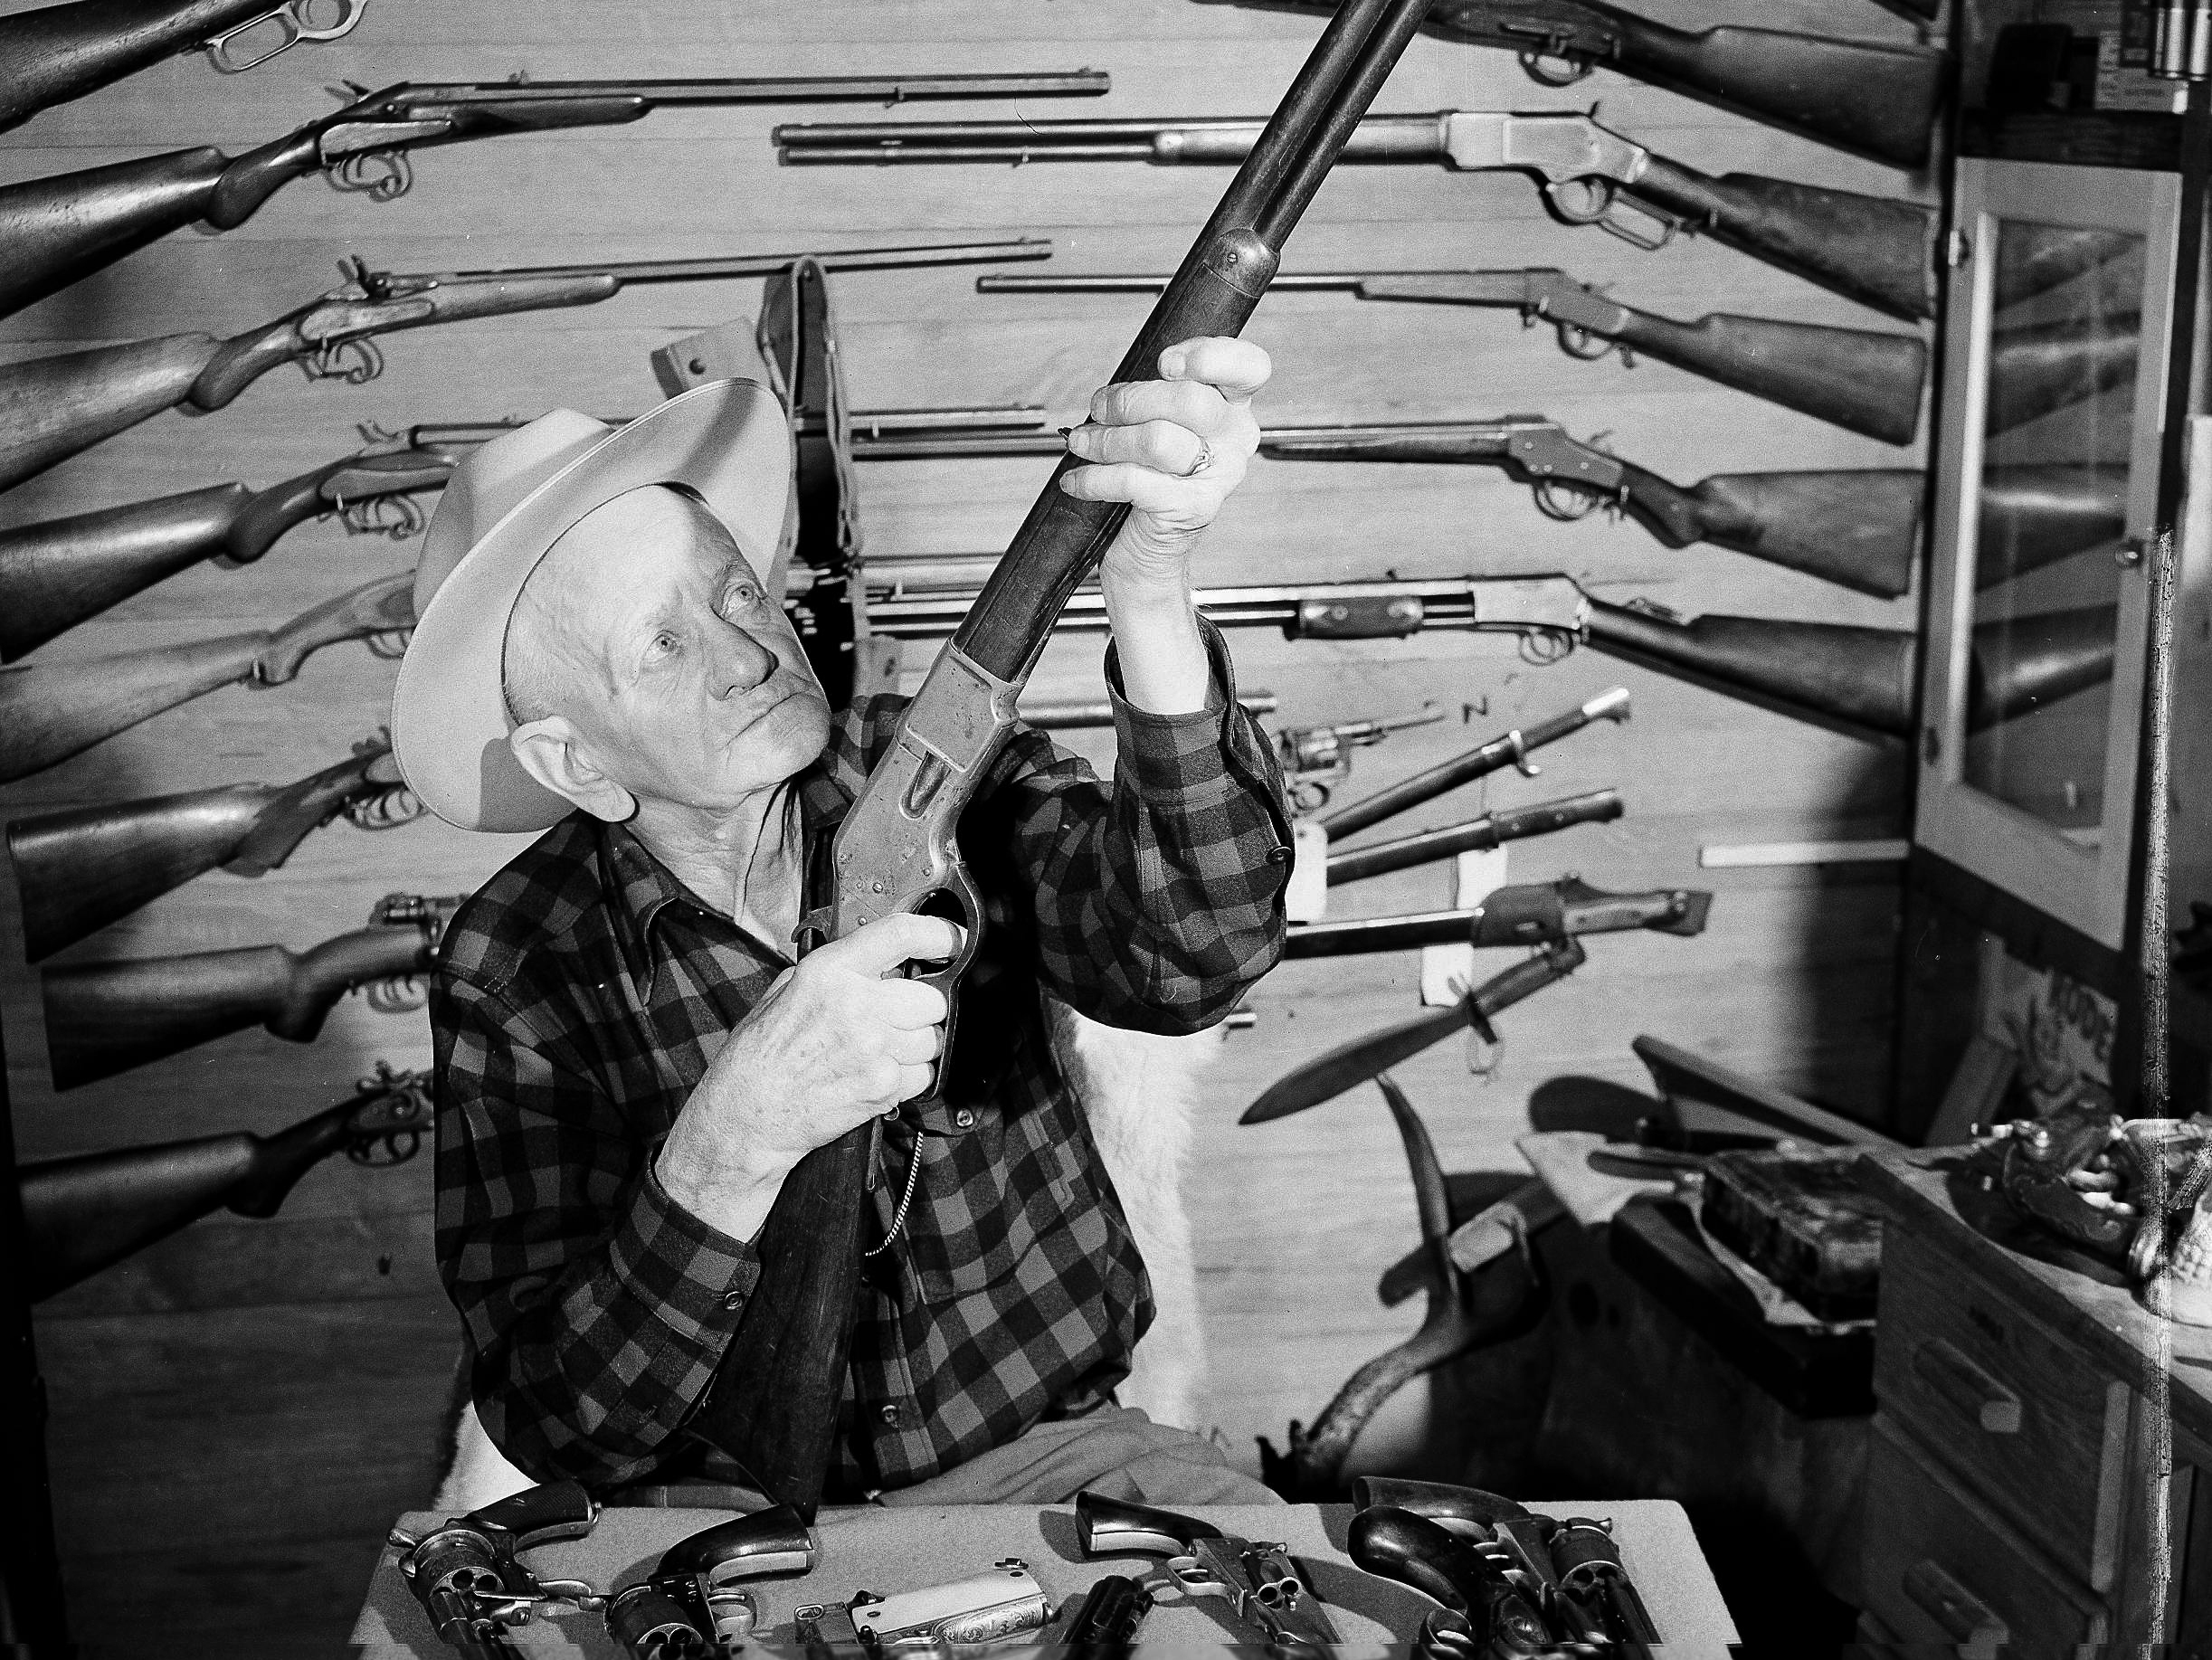 C.J. Hurst of West Covina, Calif., holds up a .44-caliber rimfire Model 66 Winchester rifle as he poses with his collection of about 600 antique guns in 1952.